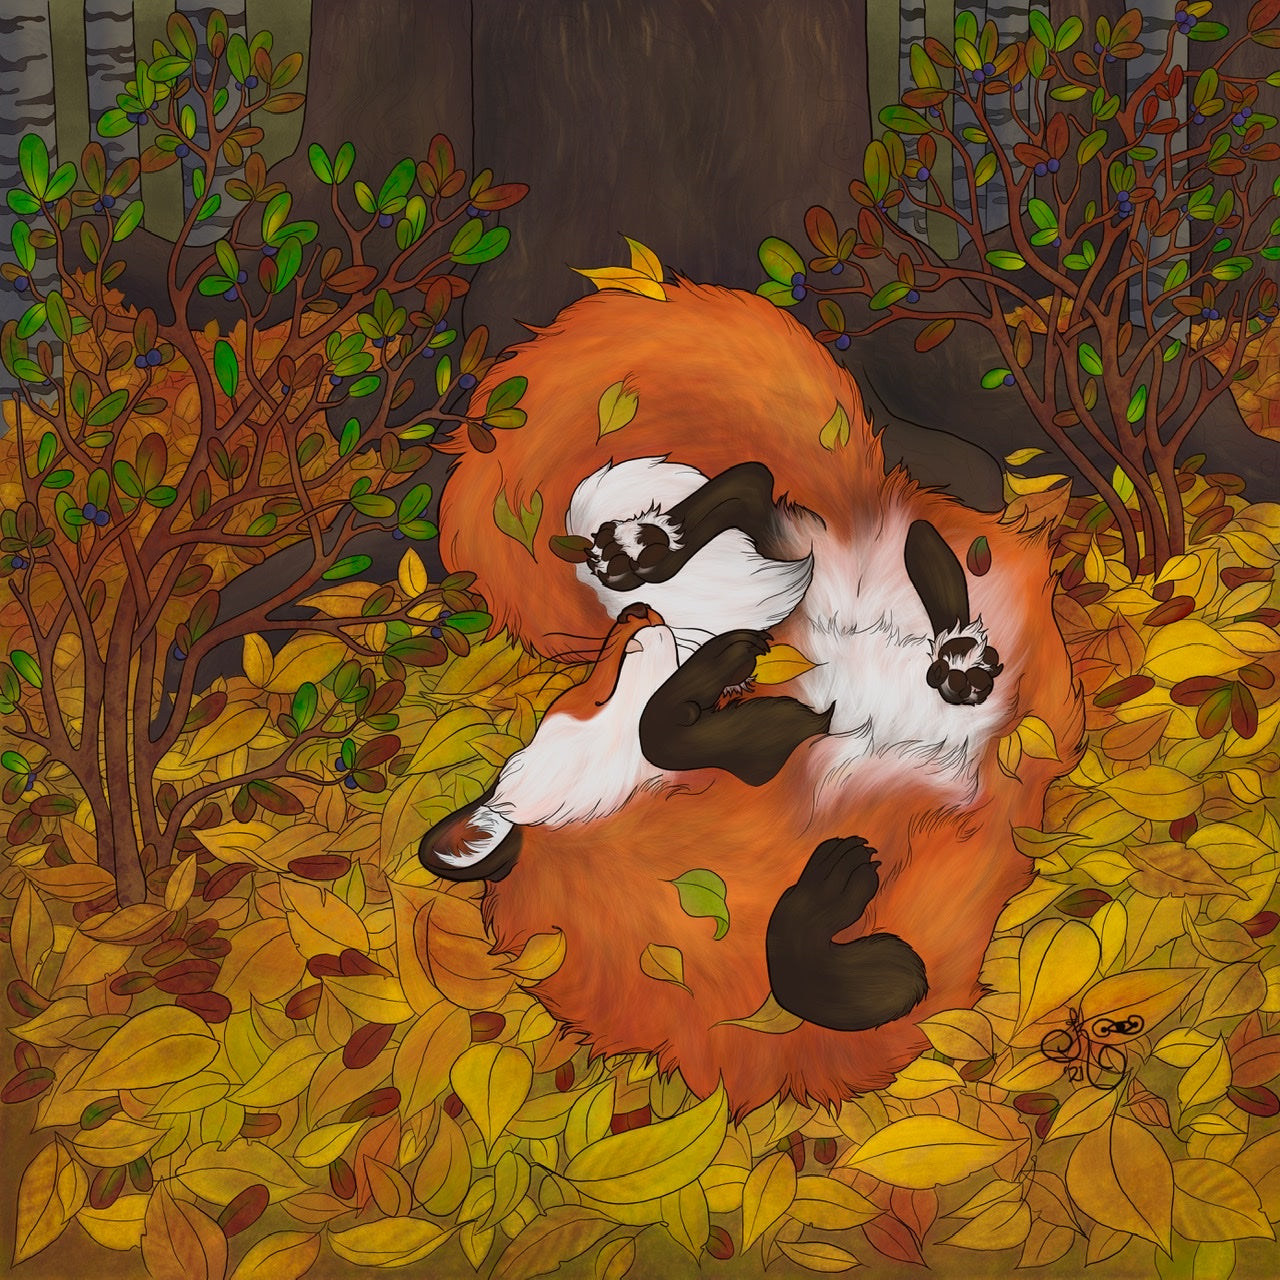 A fox joyfully rolls in a pile of golden leaves at the base of a tree and surrounded by berry bushes.